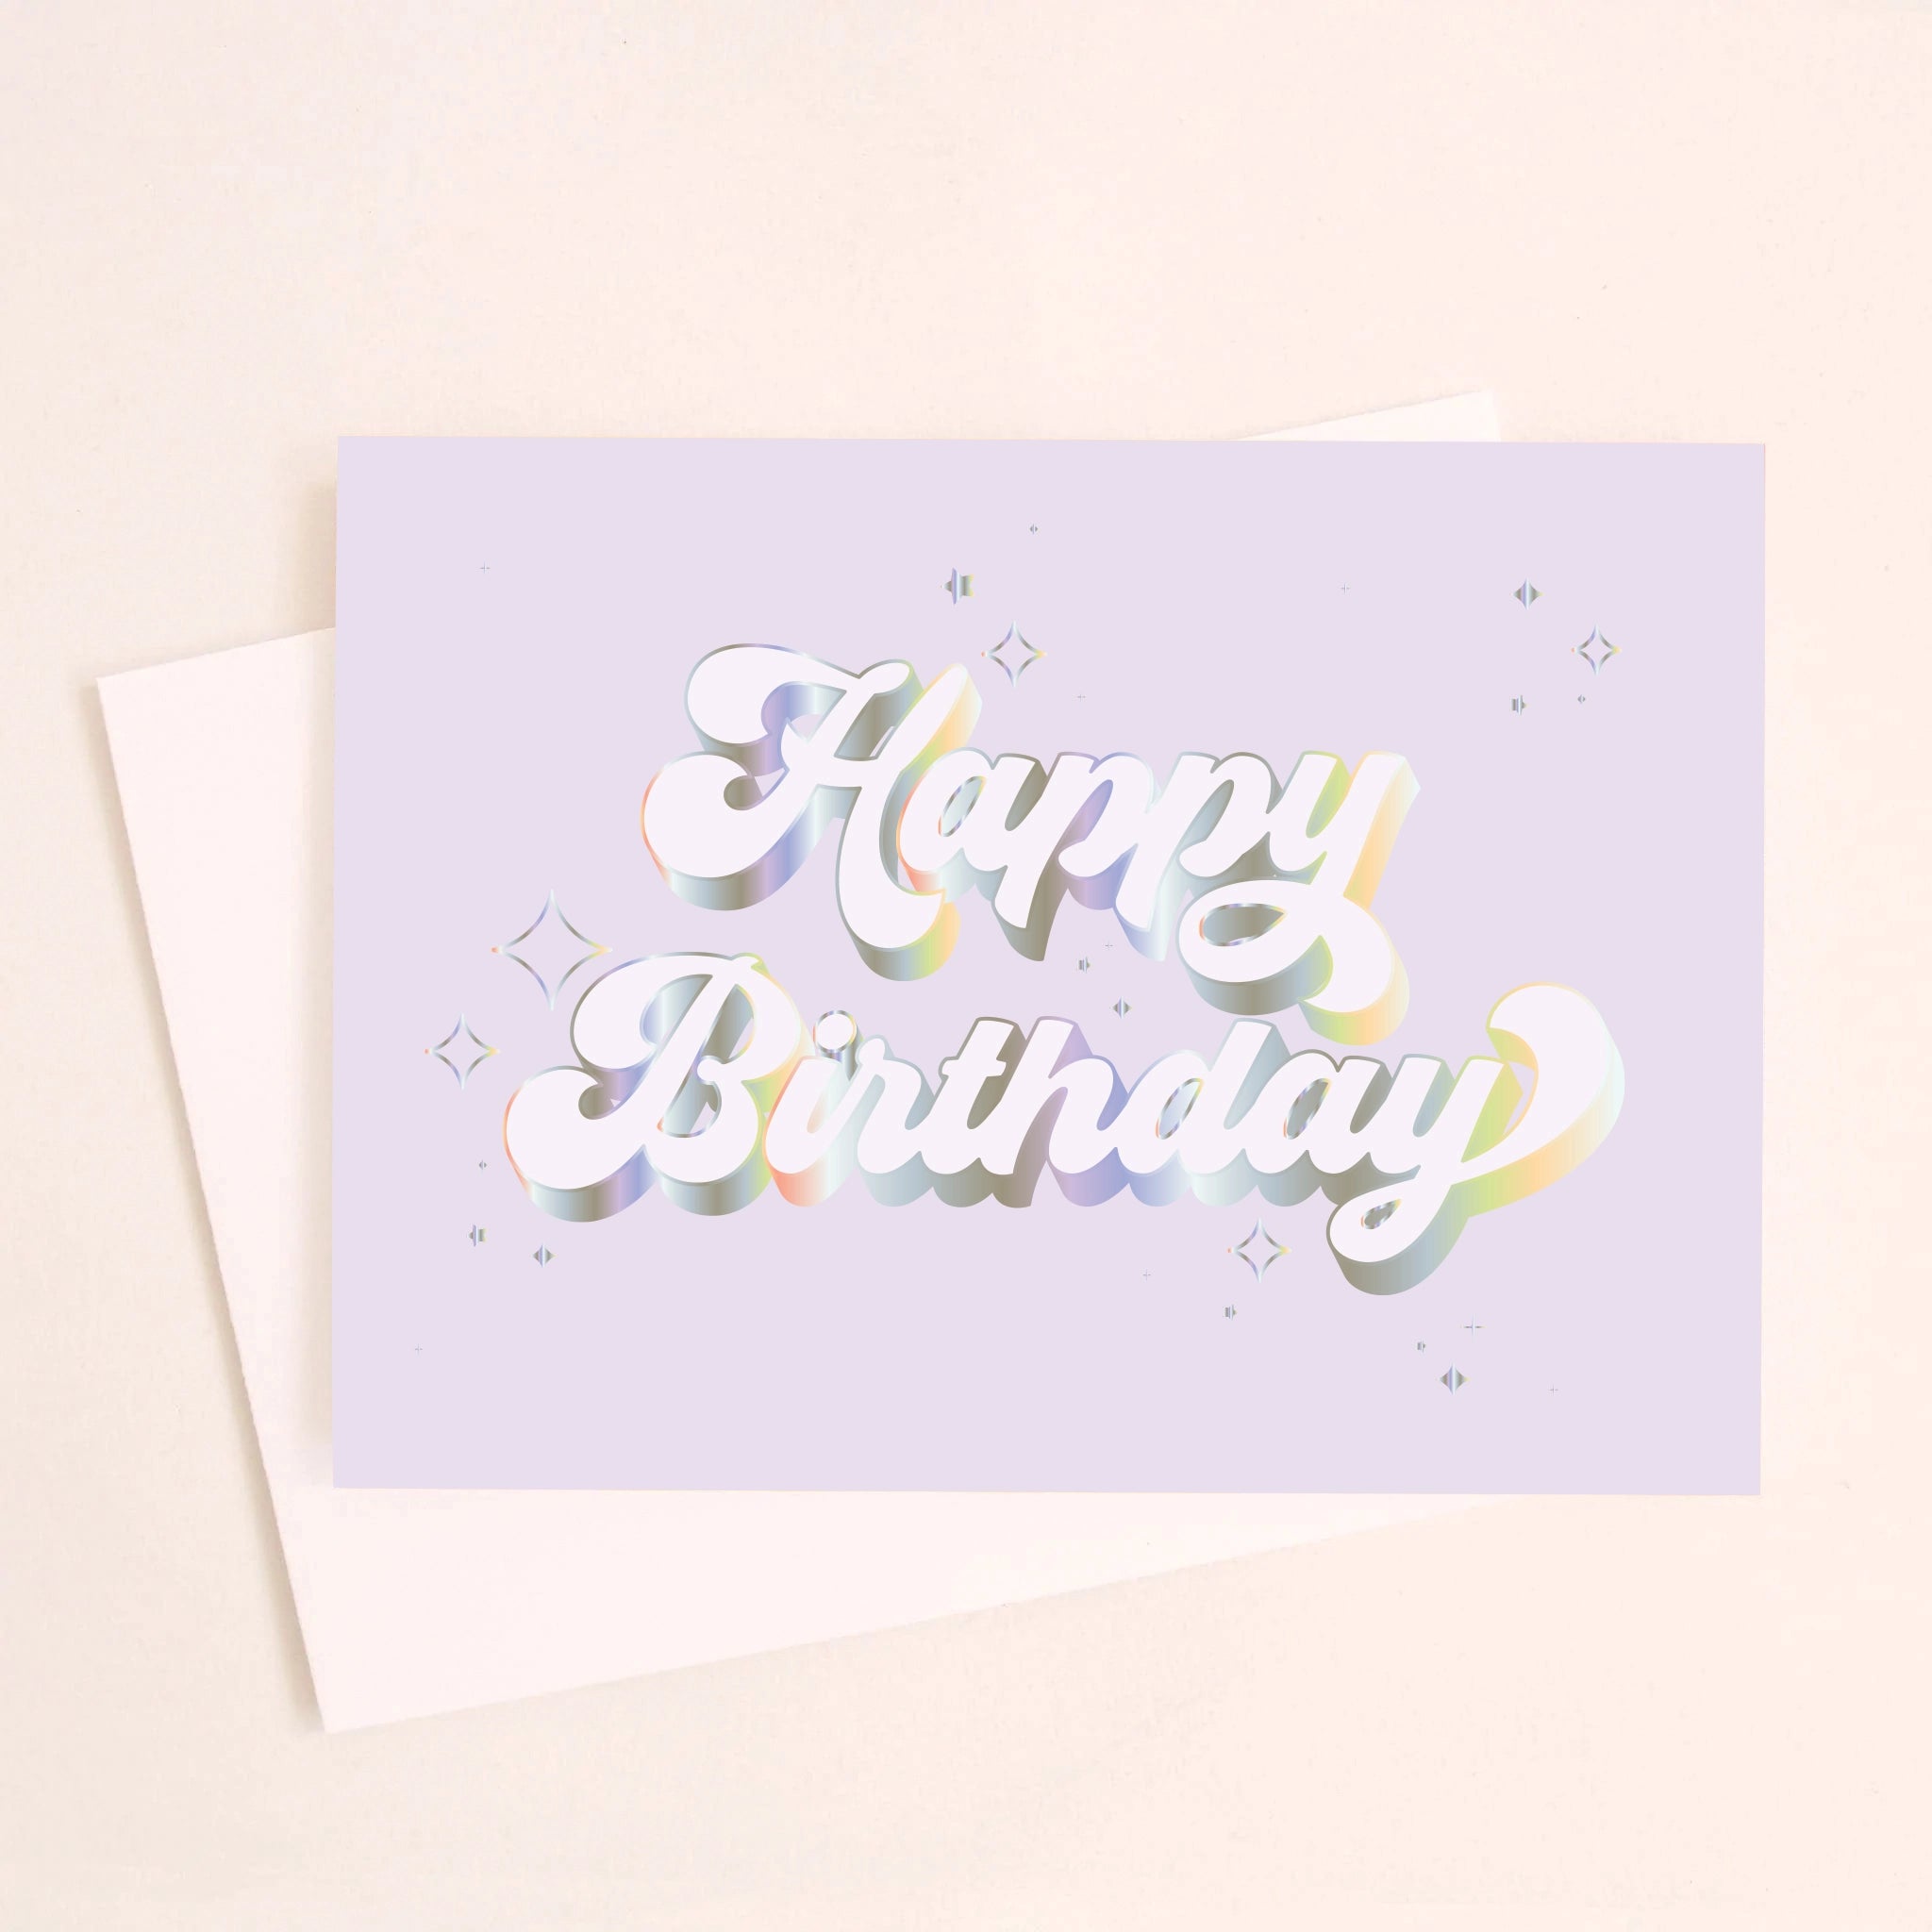 On an ivory background is a light purple/blue greeting card with white / holographic outlined text that reads, &quot;Happy Birthday&quot; along with a white envelope.